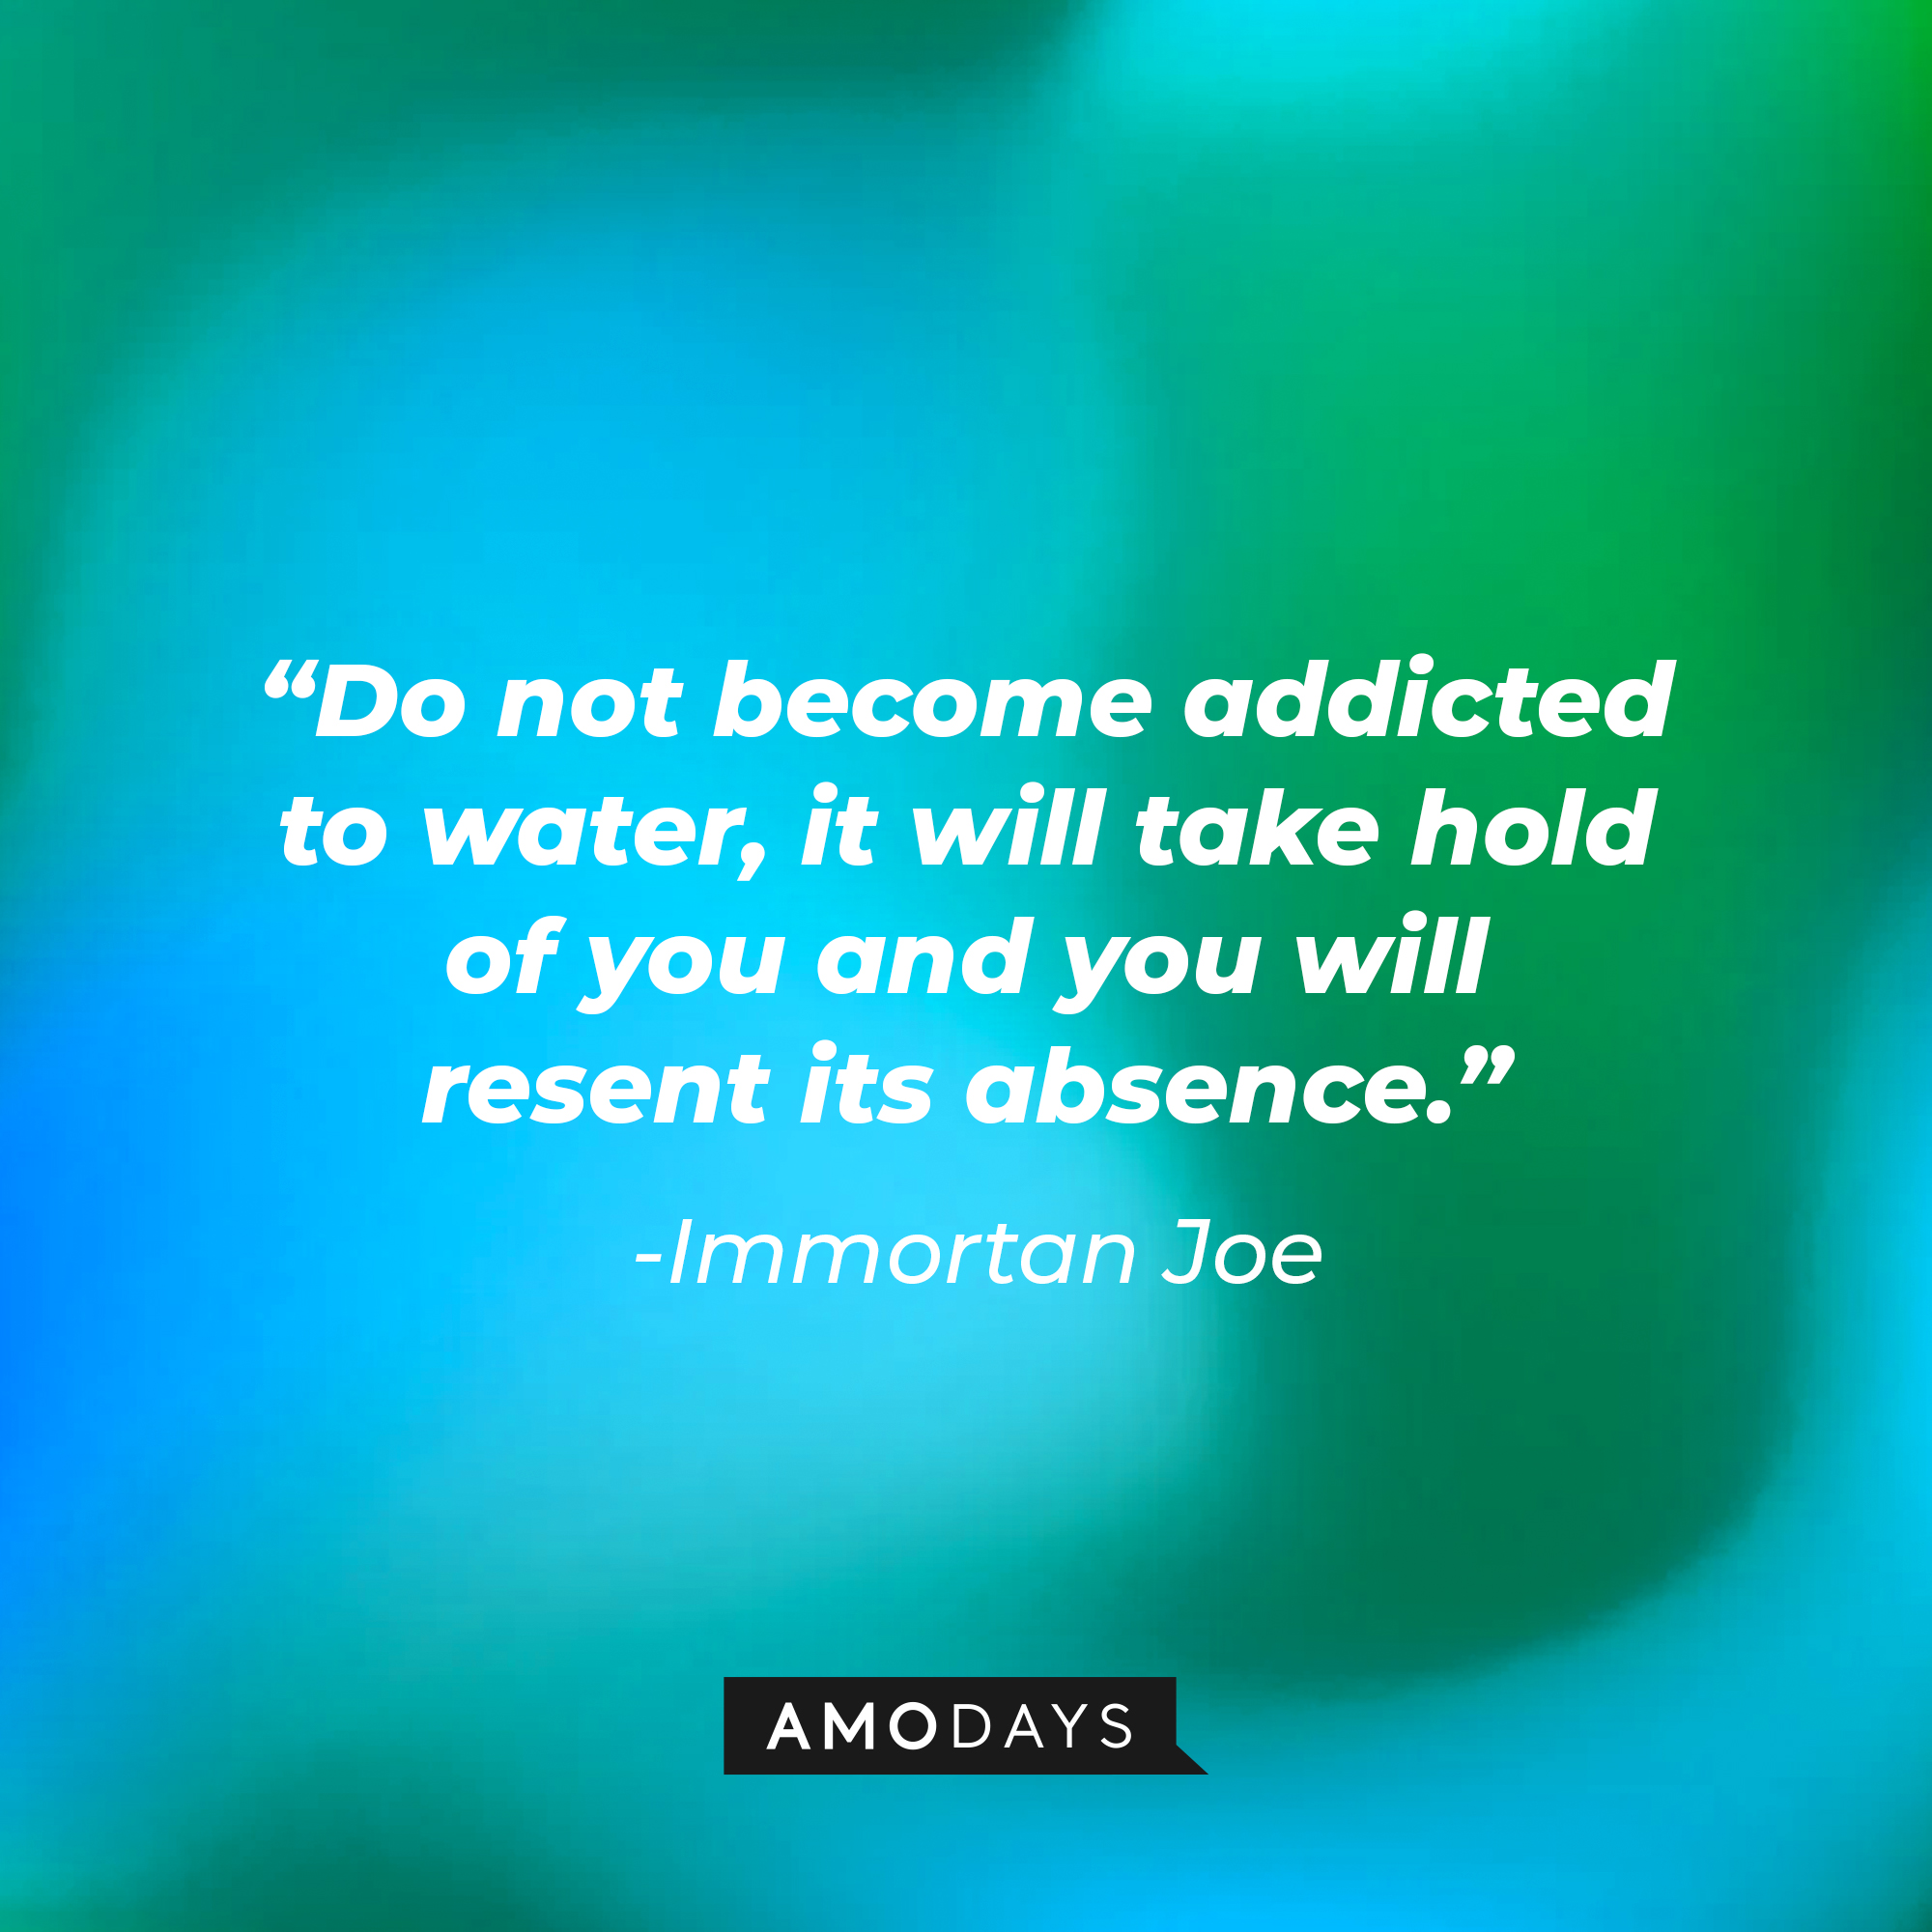 Immortan Joe’s quote: "Do not become addicted to water, it will take hold of you, and you will resent its absence." | Source: AmoDays